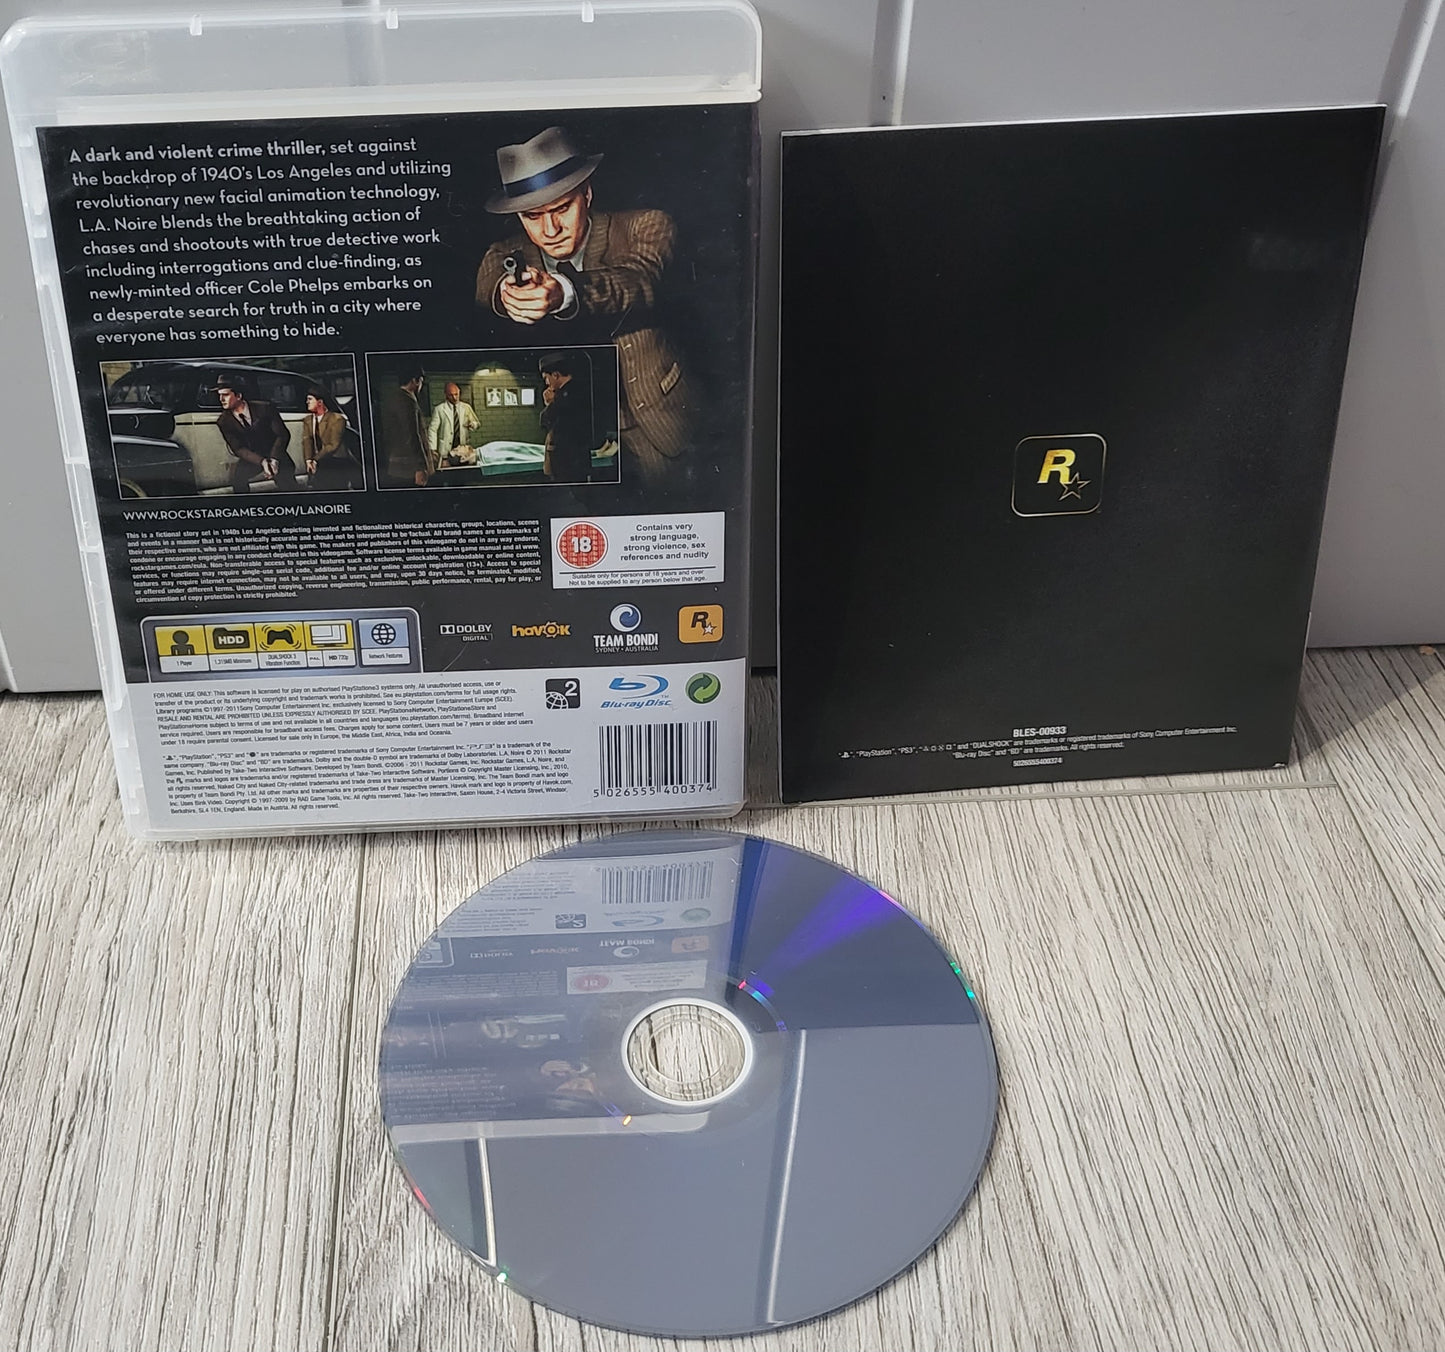 L.A. Noire Sony Playstation 3 (PS3) Game